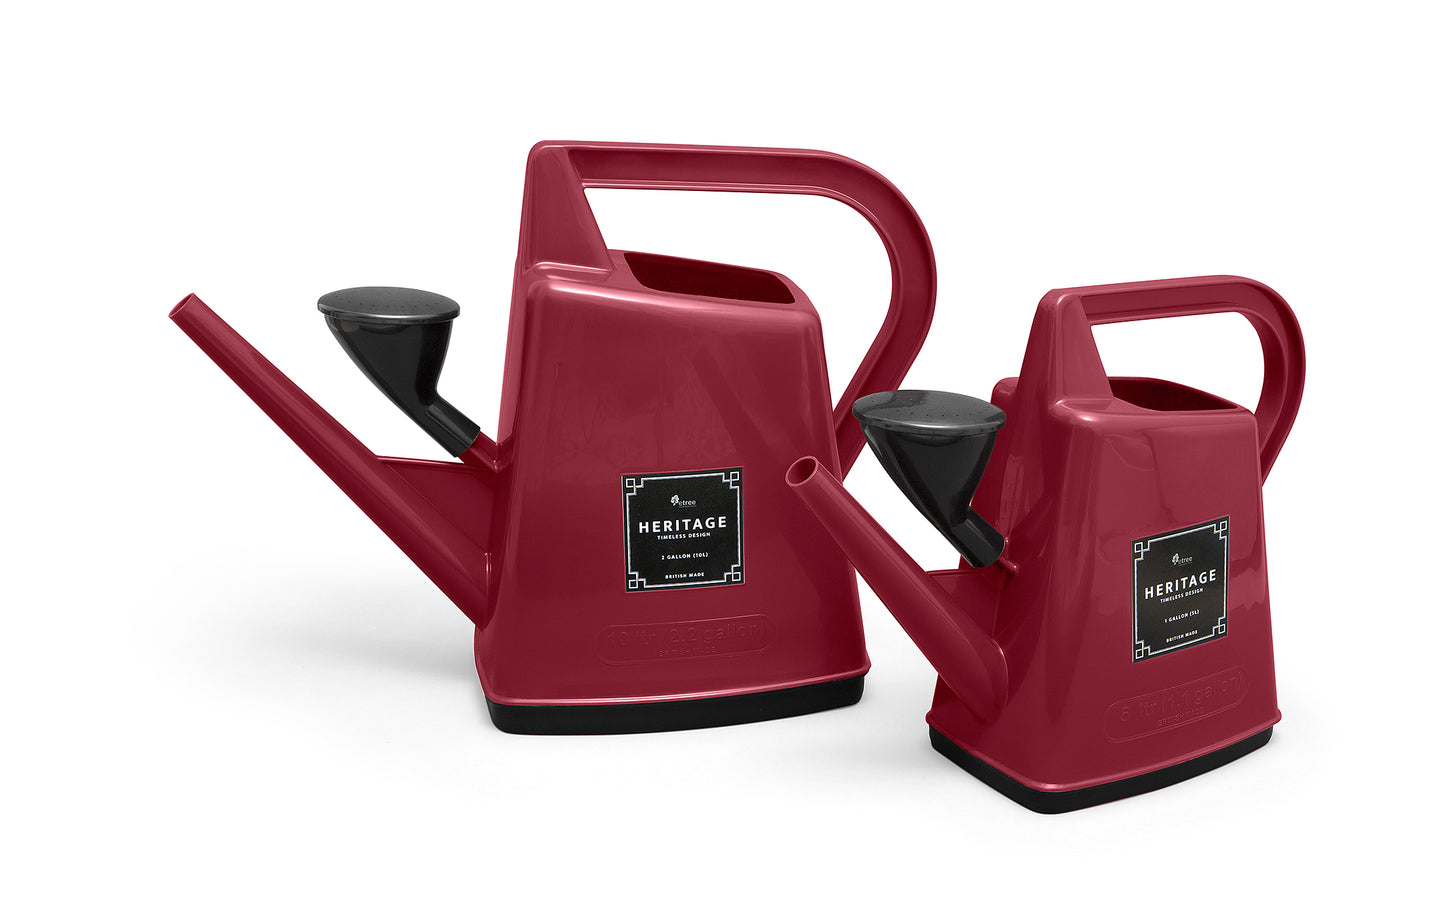 1 gallon and 2 gallon watering cans in heritage red / black plastic with nozzle sprinkler head